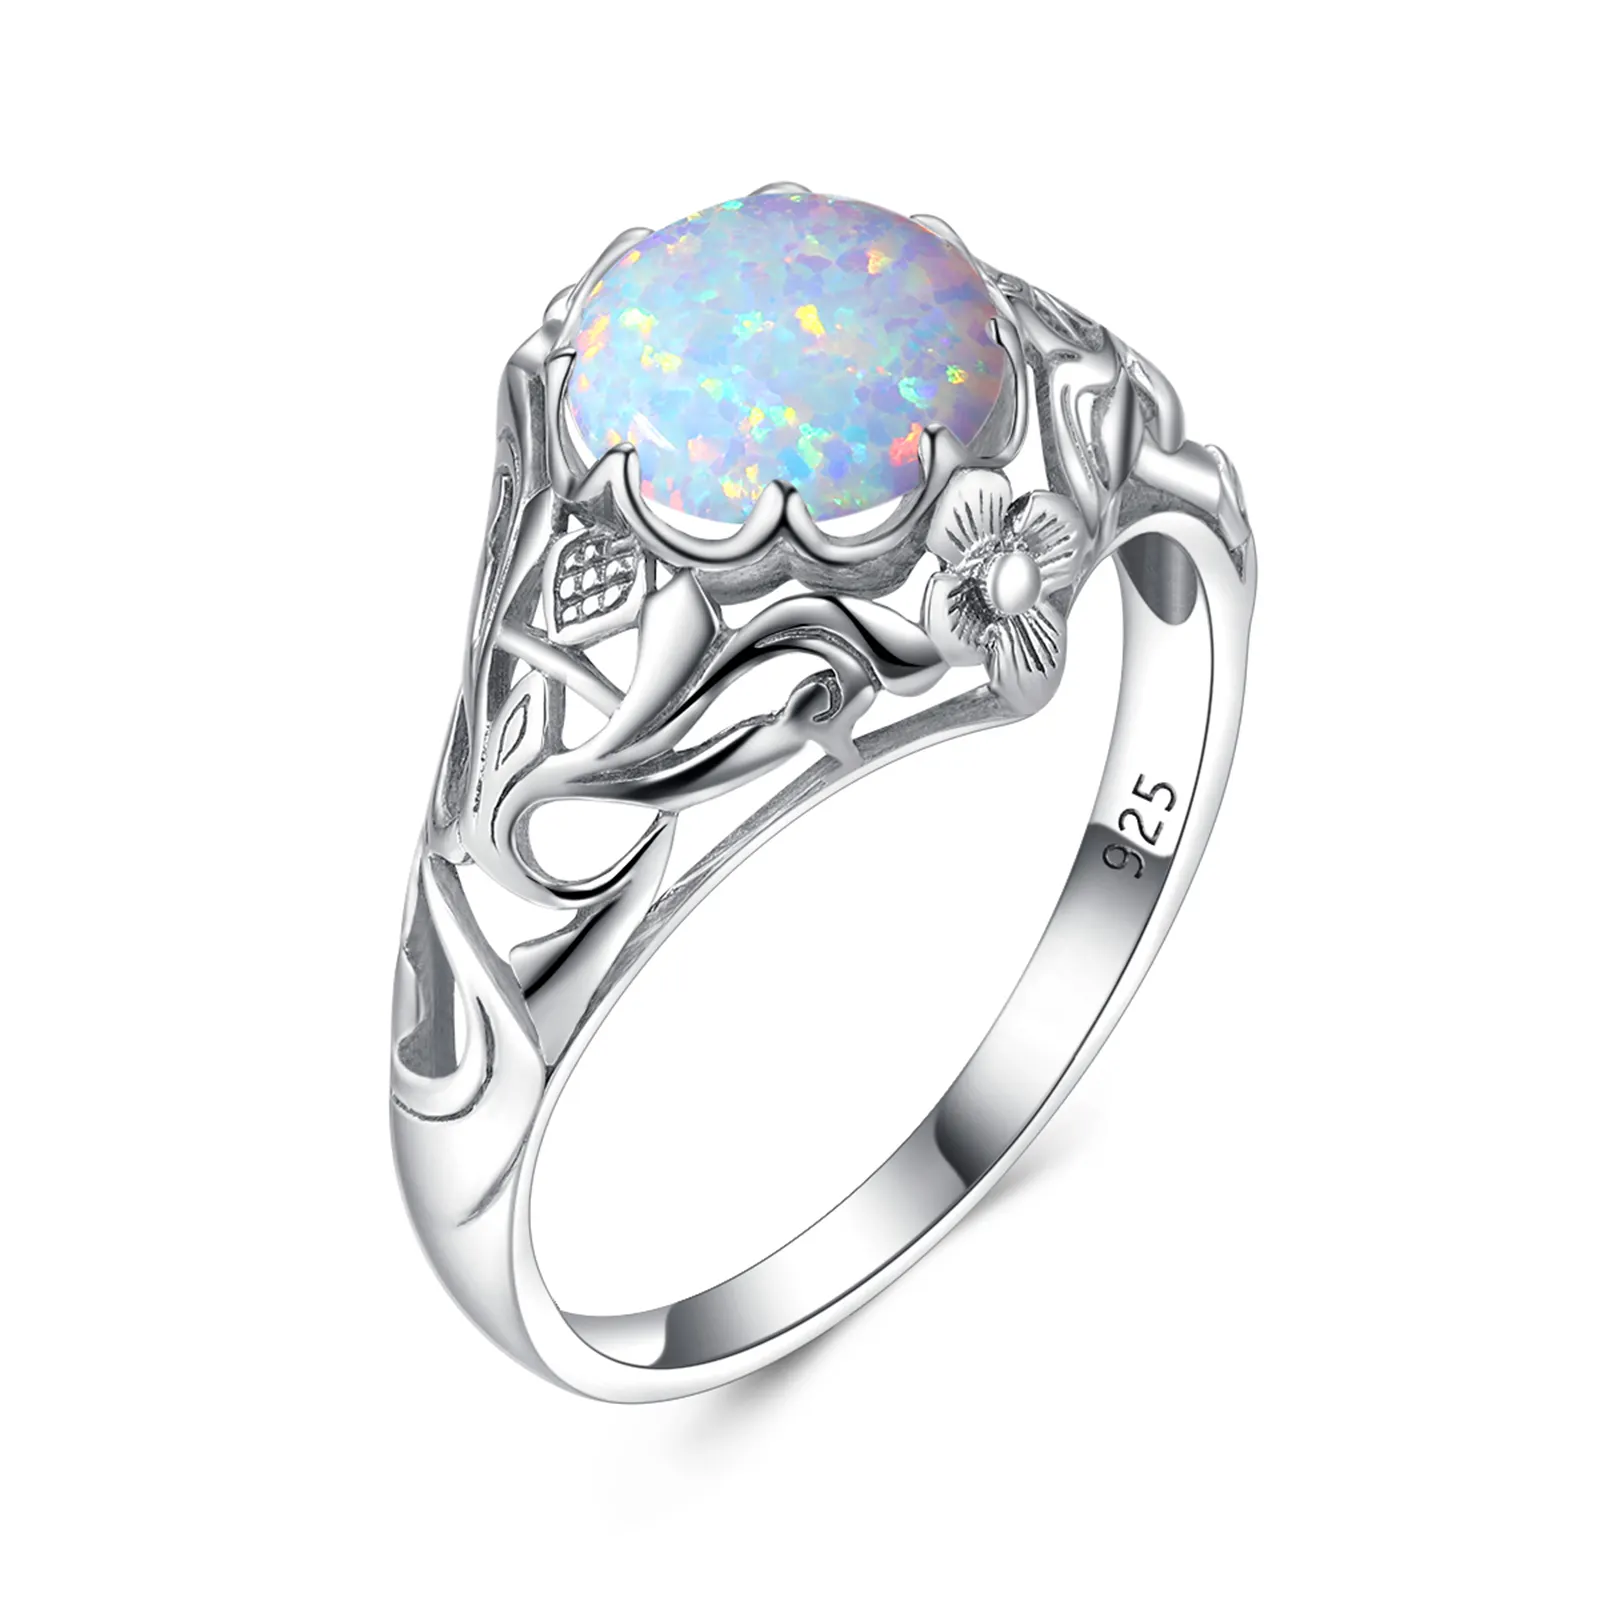 Vintage Opal Silver 925 Ring Wedding Party Promise Wife Christmas Gift Art Filigree Real 925 Sterling Silver Rings Jewelry